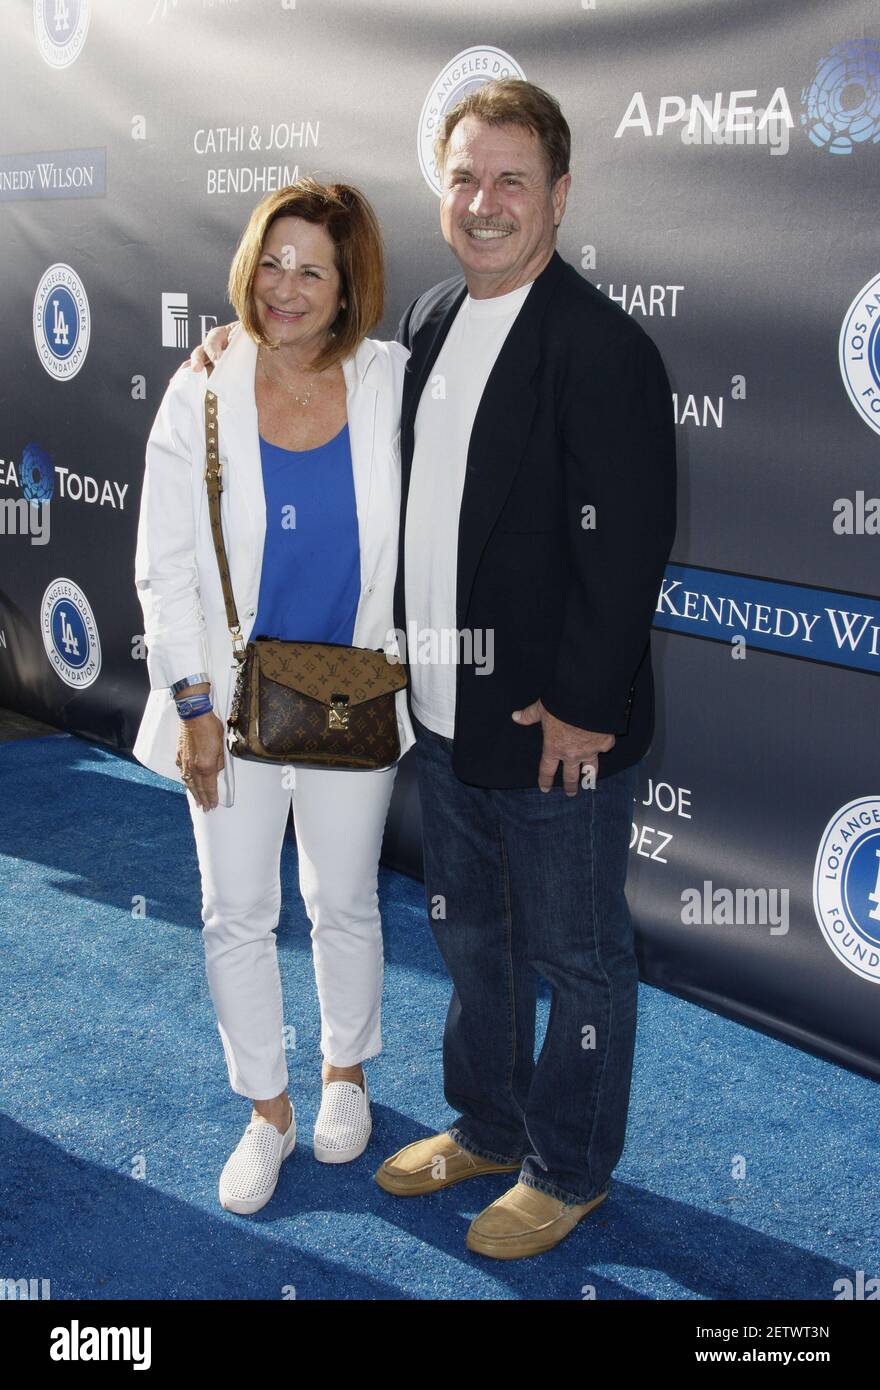 Former baseball player Ron Cey and Fran Cey attend Los Angeles Dodgers  Foundation's 3rd Annual Blue Diamond Gala at Dodger Stadium in Los Angeles,  CA on June 8, 2017. (Photo by CraSH/imageSPACE) ***